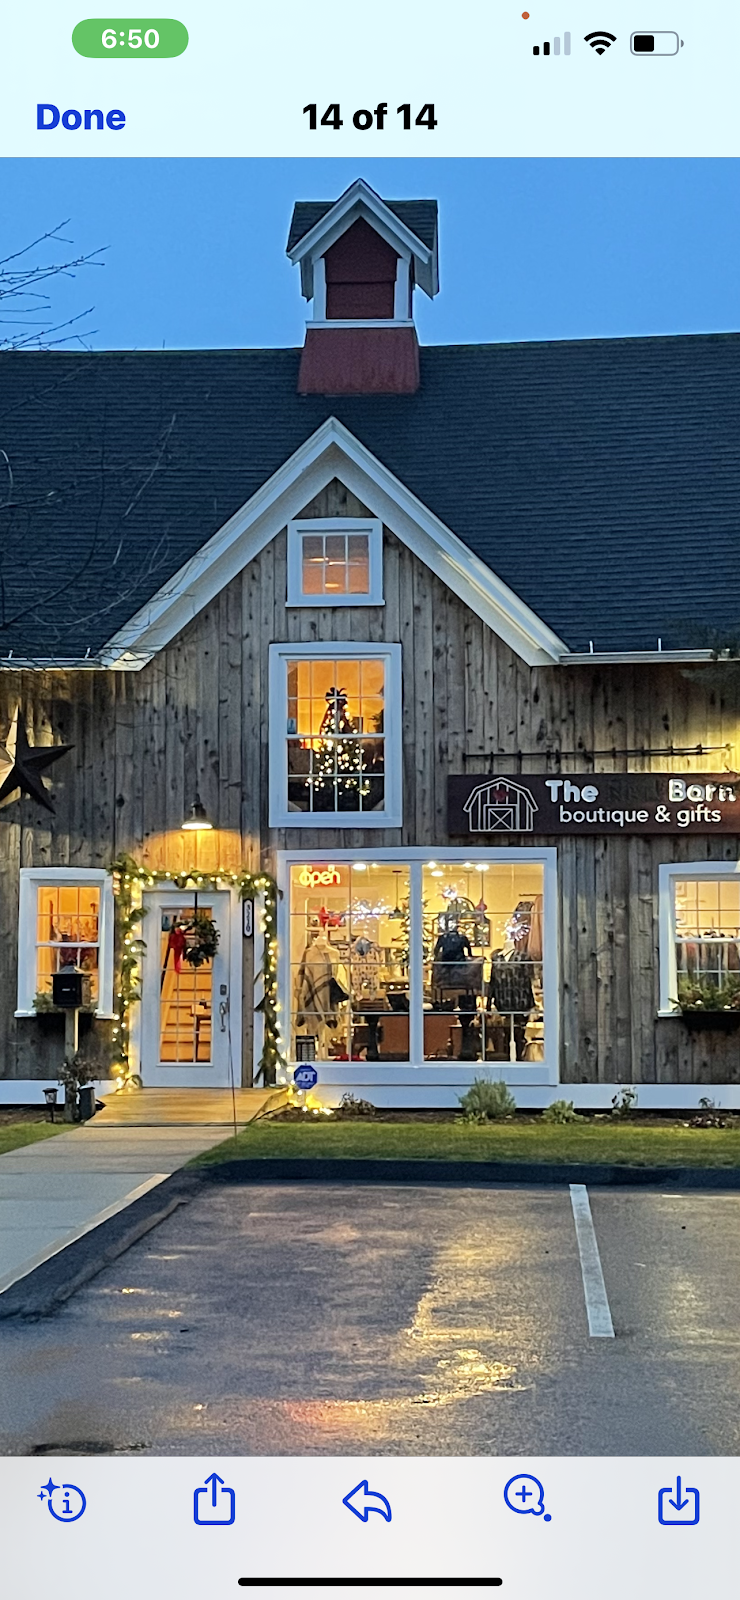 The Barn Boutique & Gifts | 3210 Whitney Ave, Hamden, CT 06518 | Phone: (203) 691-8225